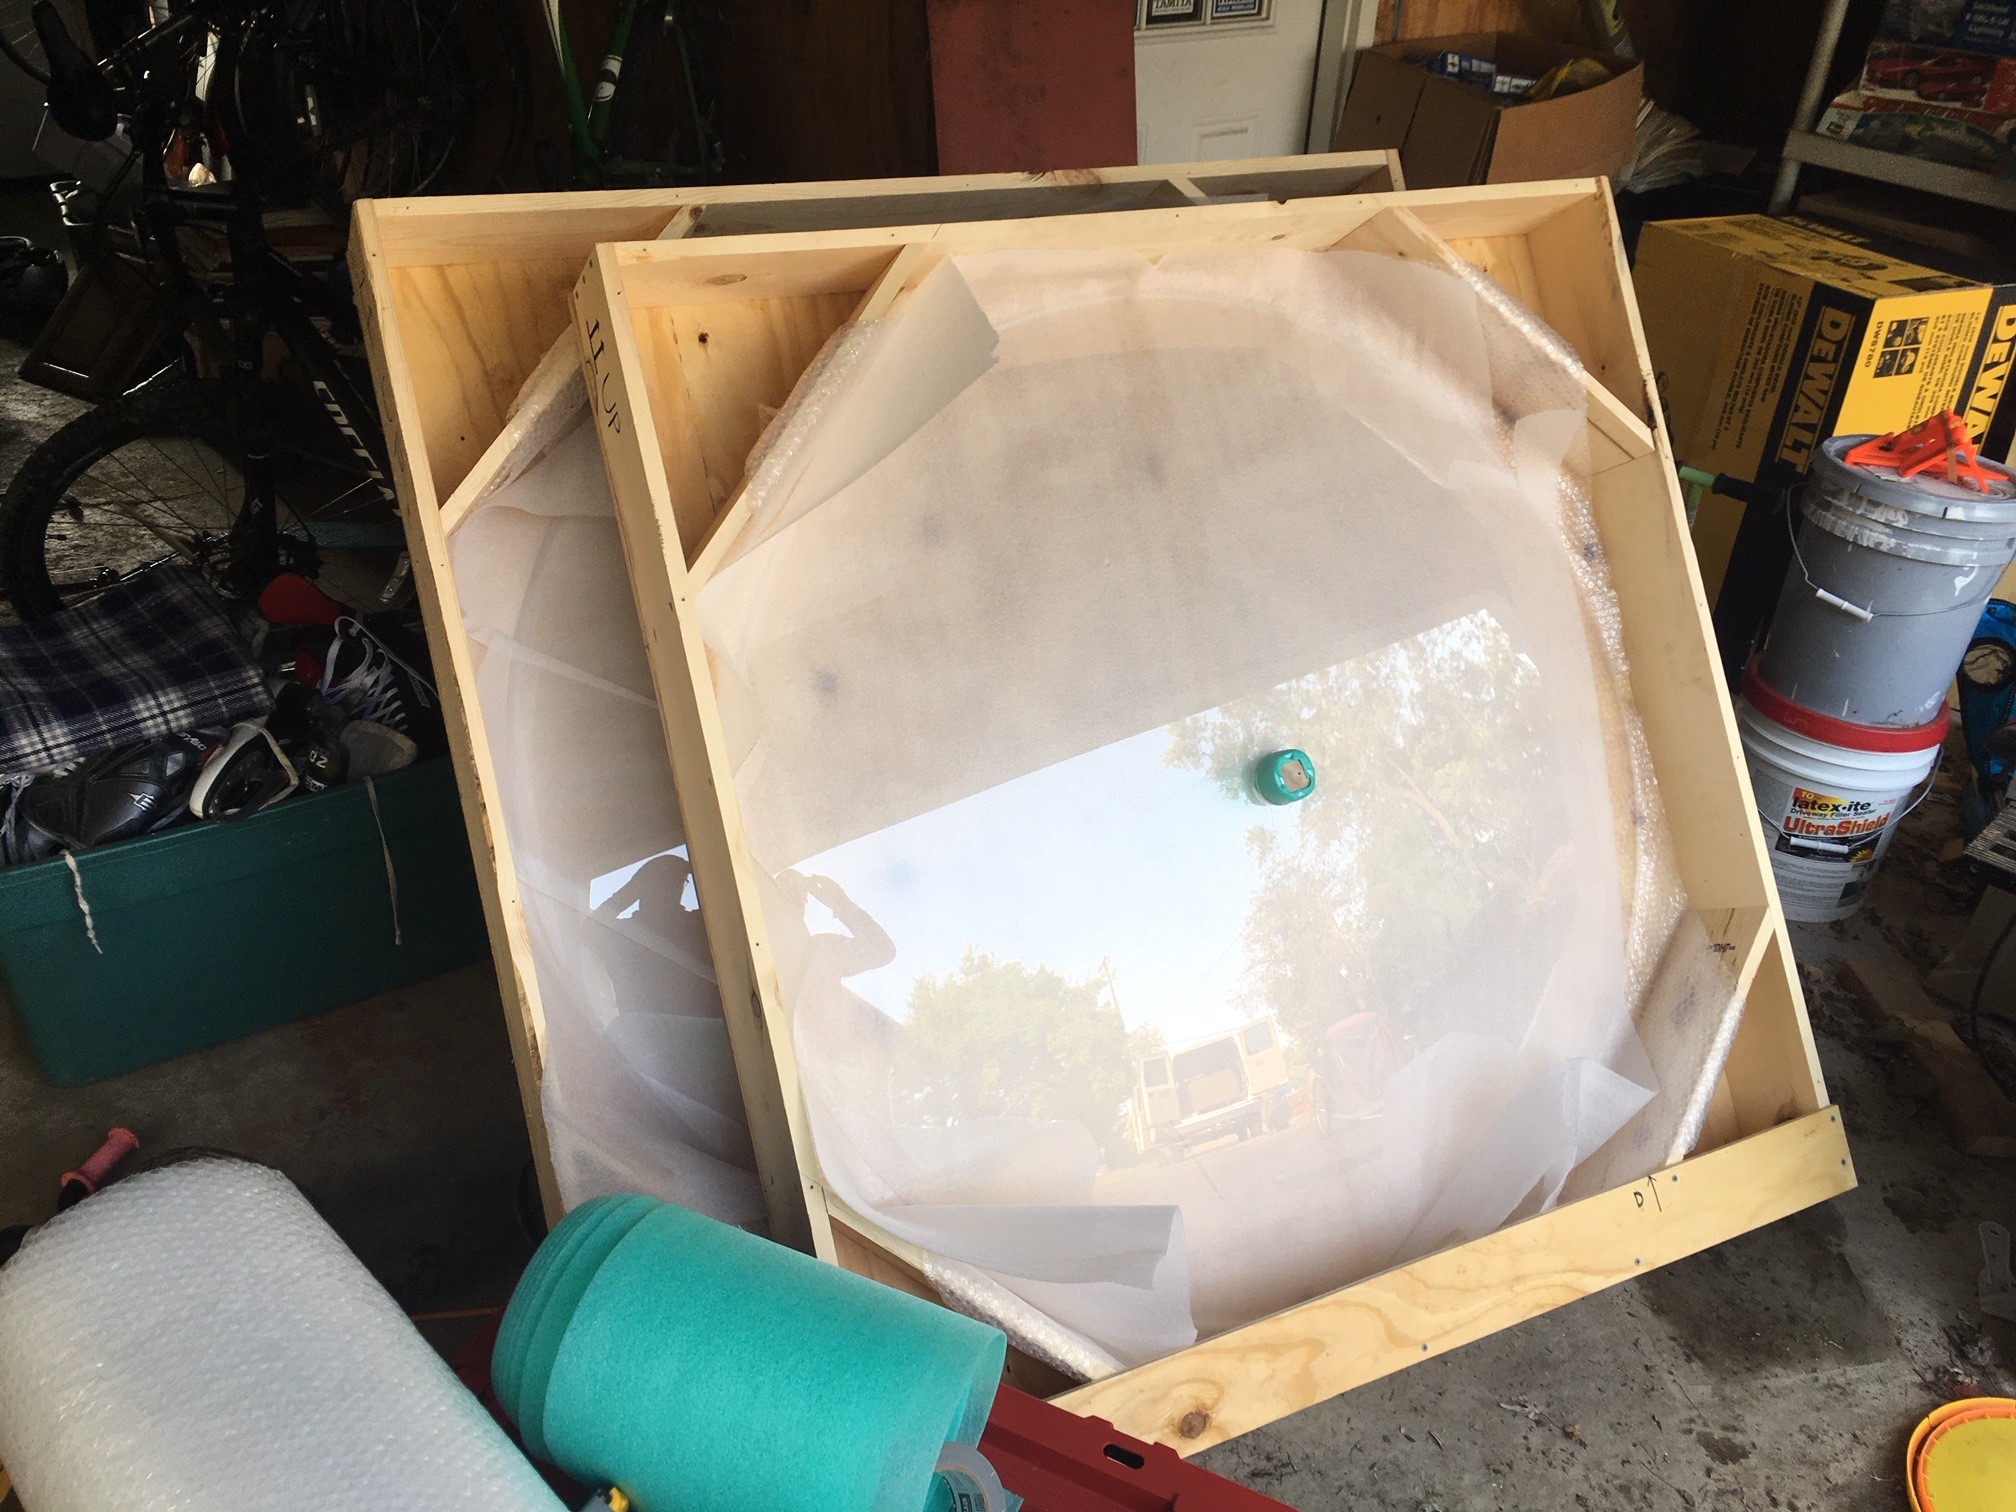 Blown Domes in Custom-Made Wooden Boxes in Garage 9-15-2020.jpg